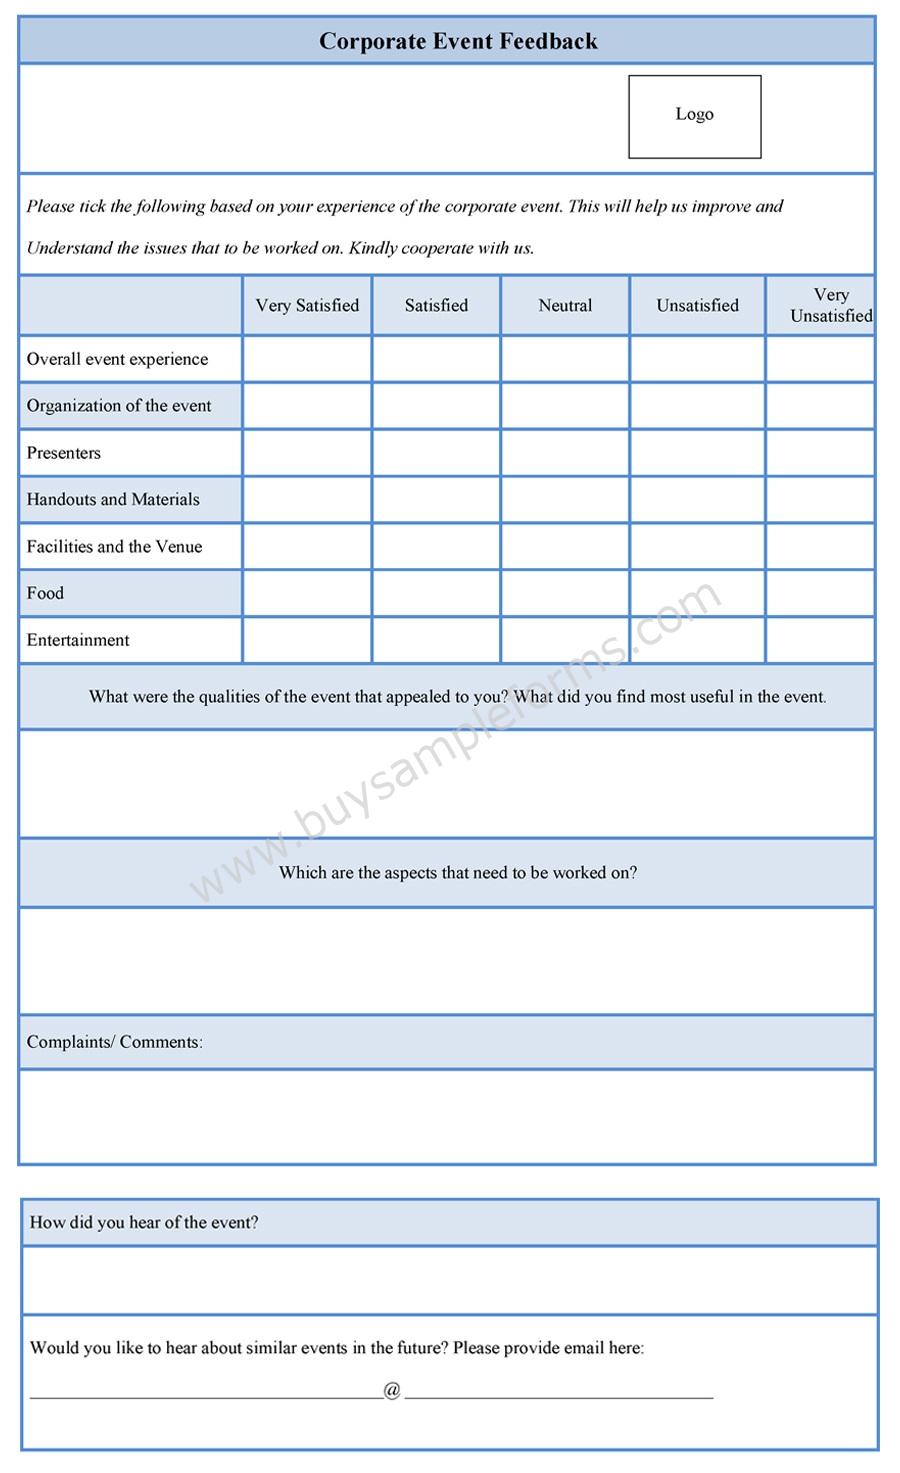 Corporate Event Feedback Form sample